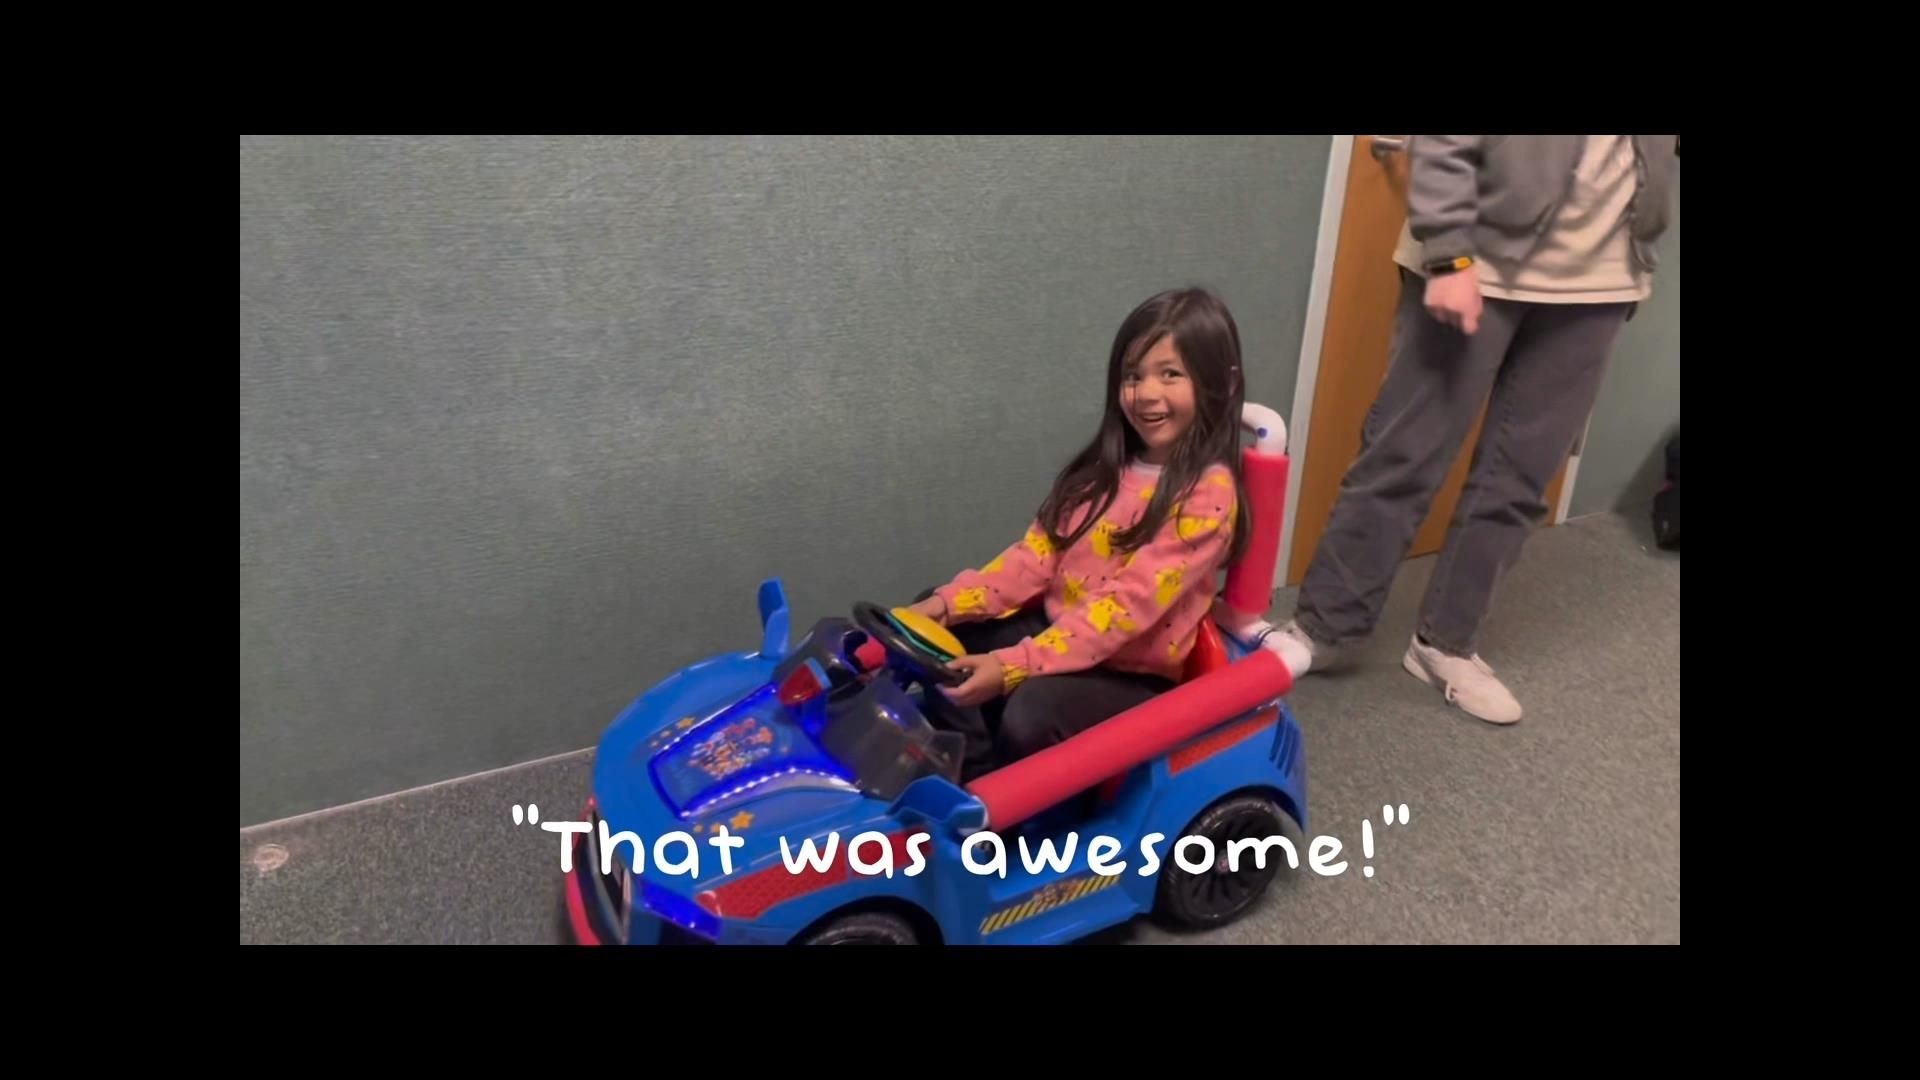 Student sat in an adaptive toy car with "That was awesome!" overlaid onto image.